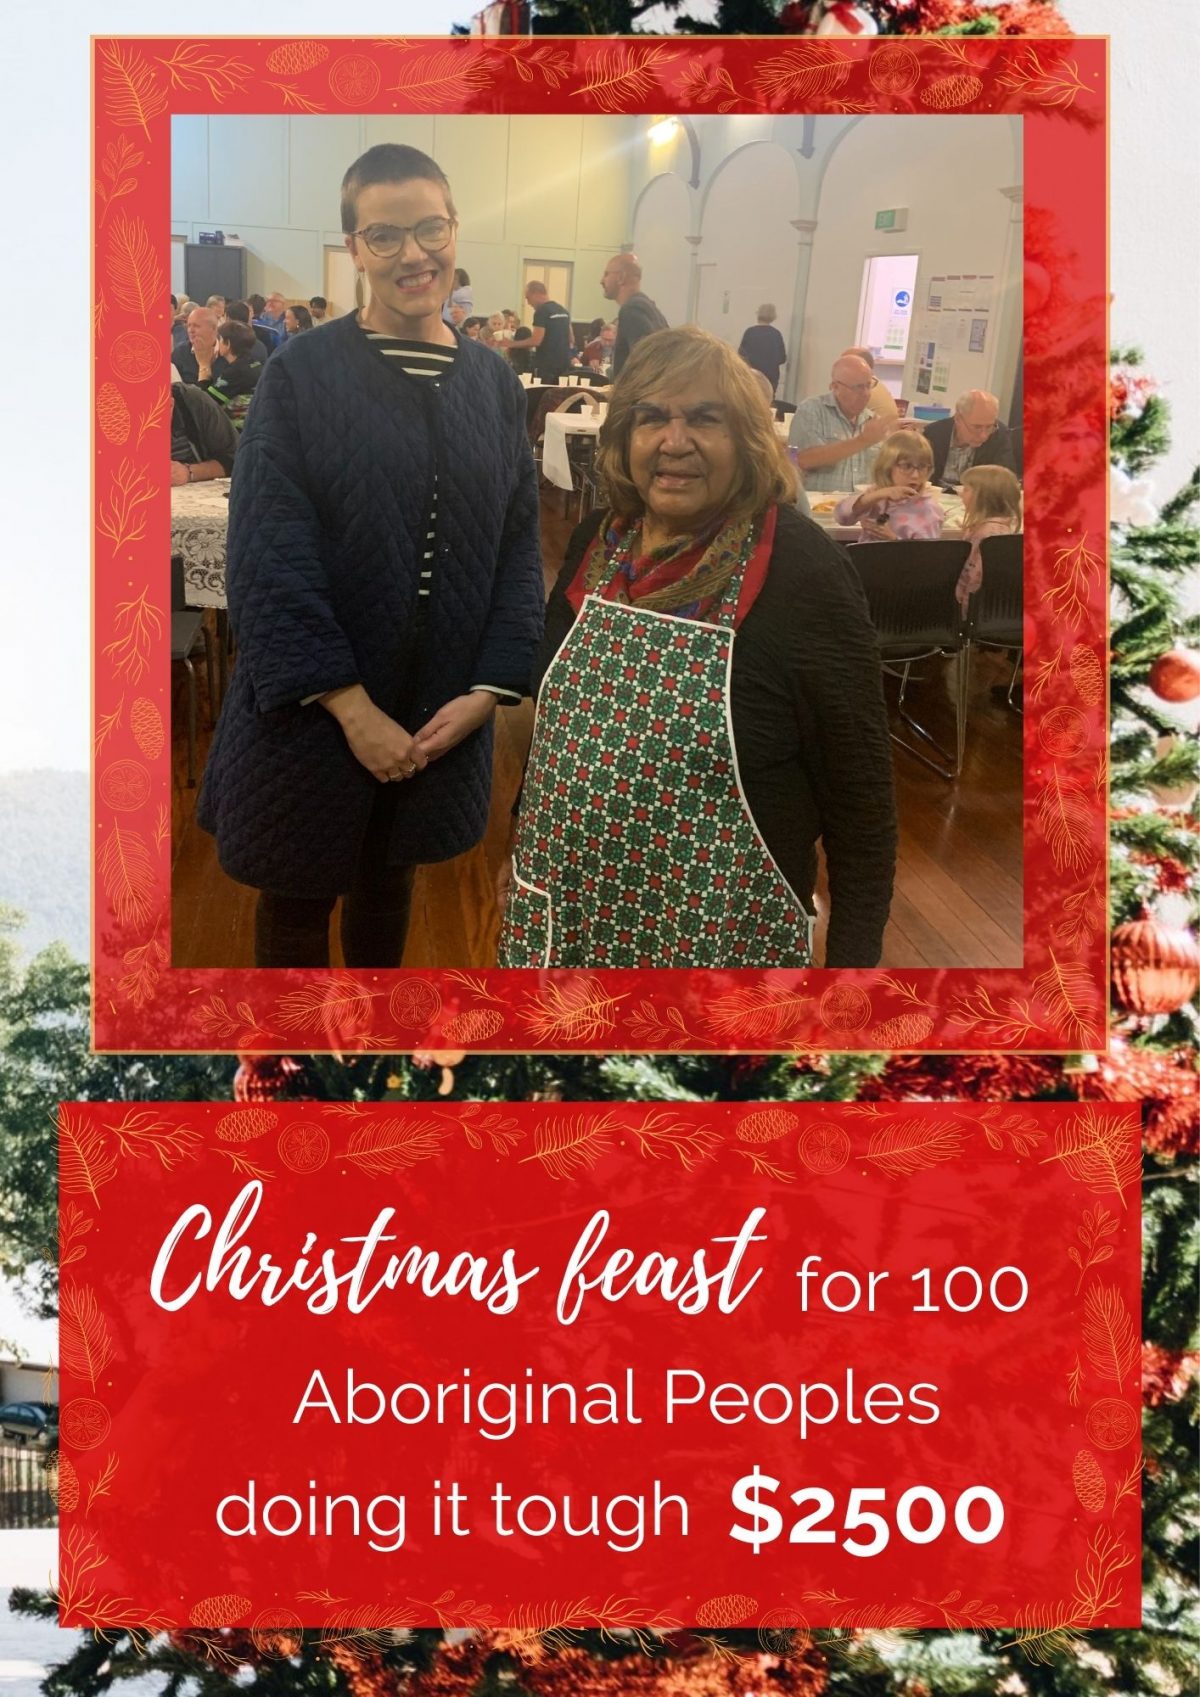 Christmas feast for 100 Aboriginal Peoples doing it tough. $2500